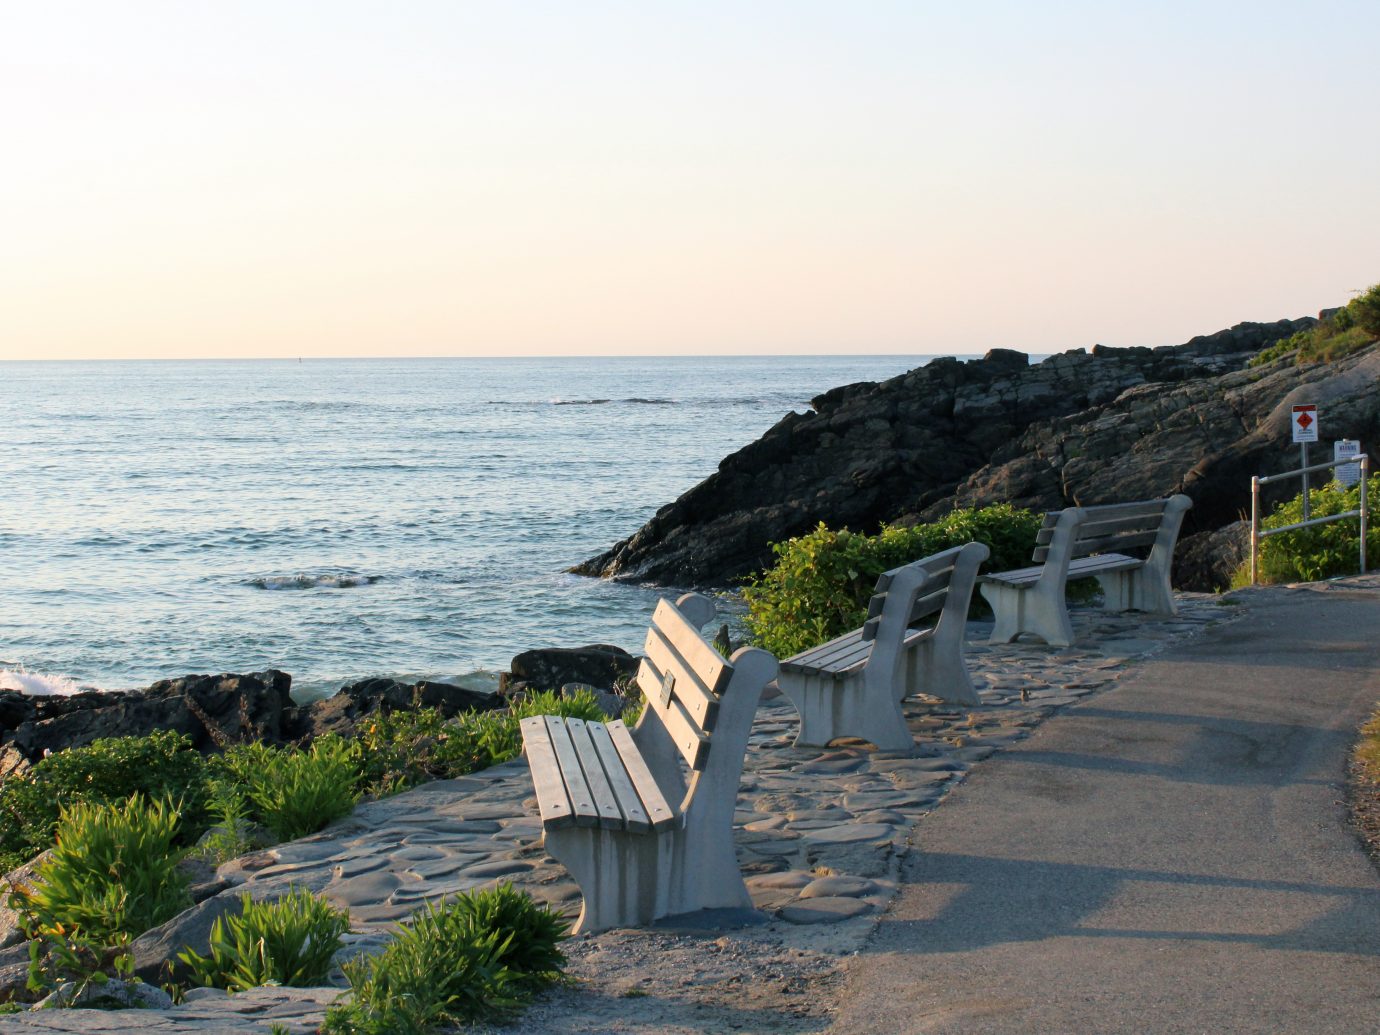 Ogunquit, Maine - The Marginal Way, a picturesque mile-long footpath along New England's Coast. This photo was taken at dawn in the summer.